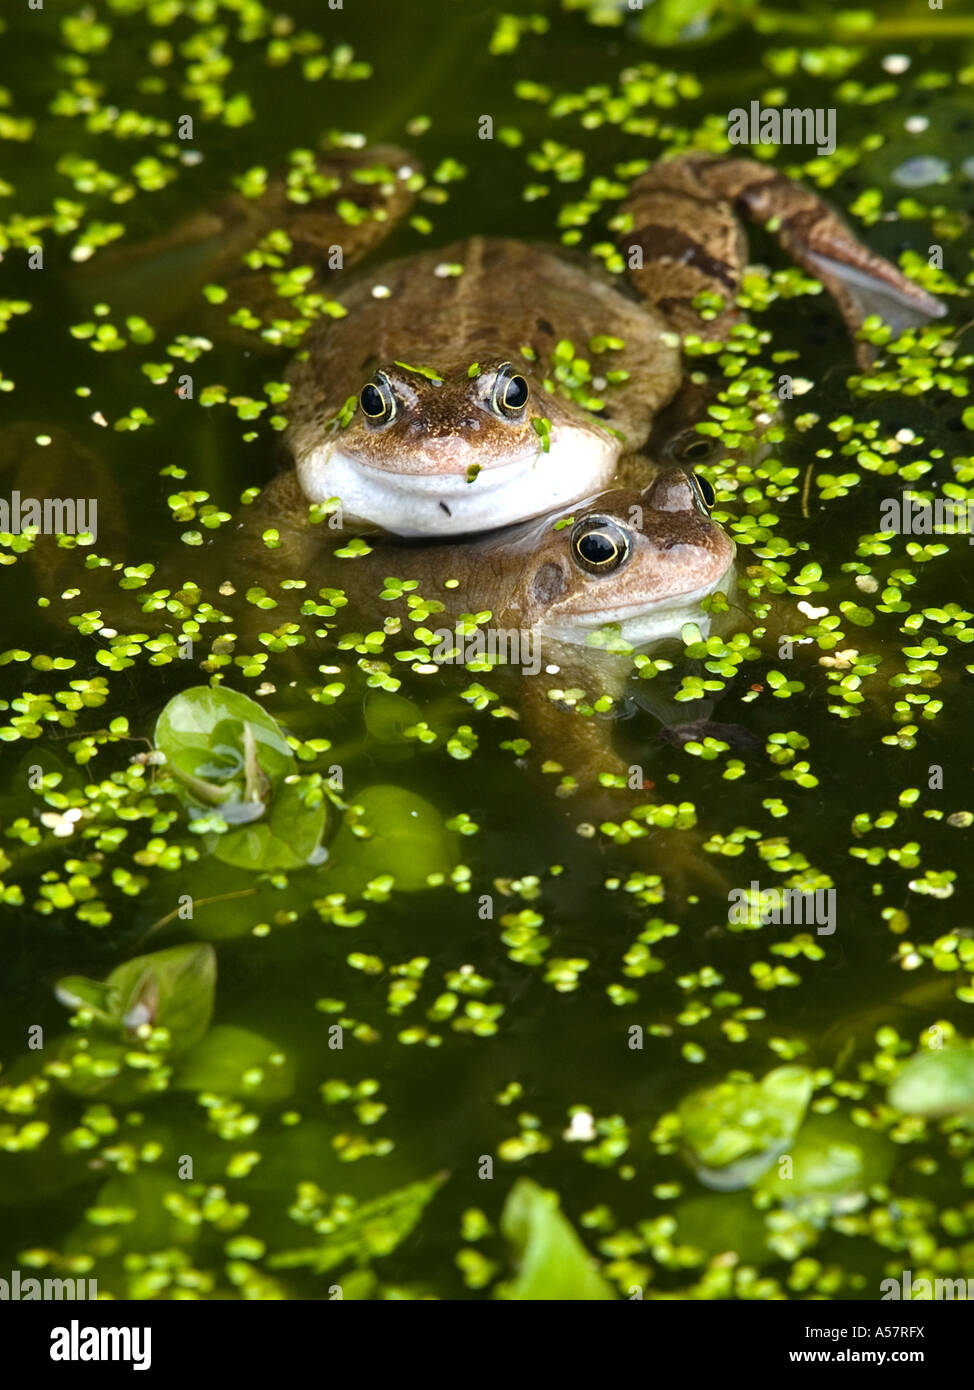 Mating Common Frogs Rana temporaria in duck weed in a garden pond Stock Photo